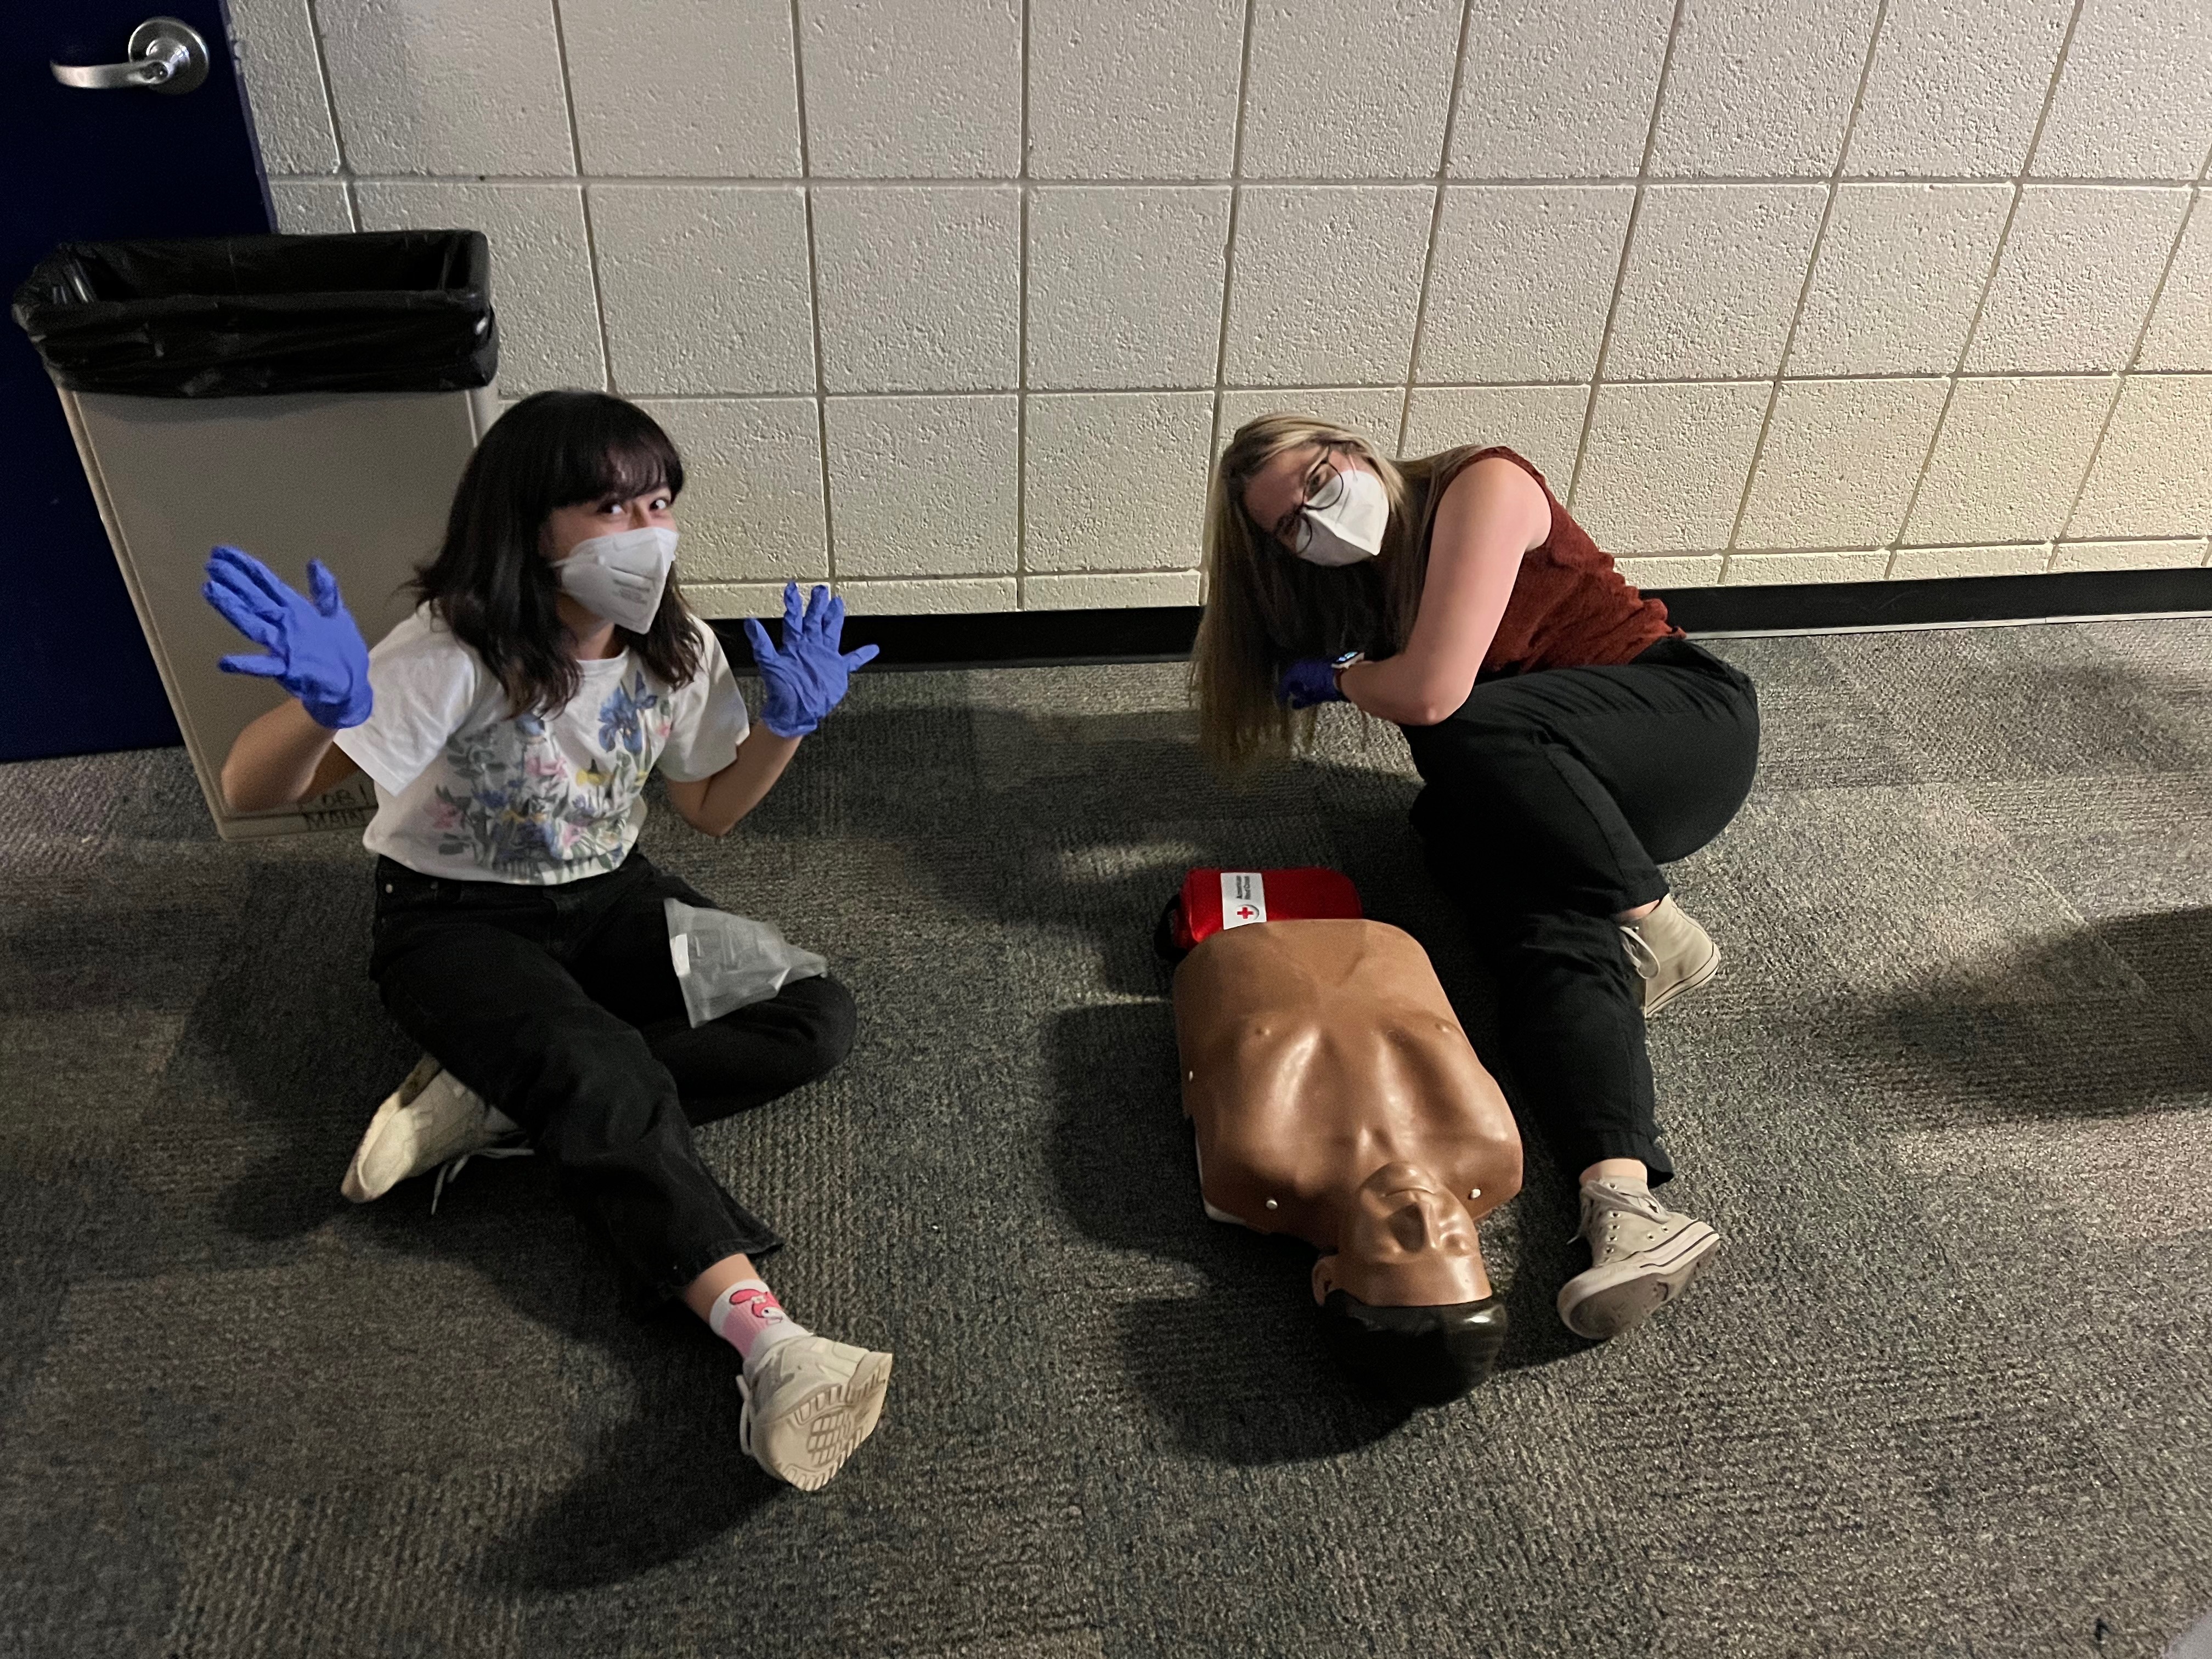 Lab members at a CPR training session